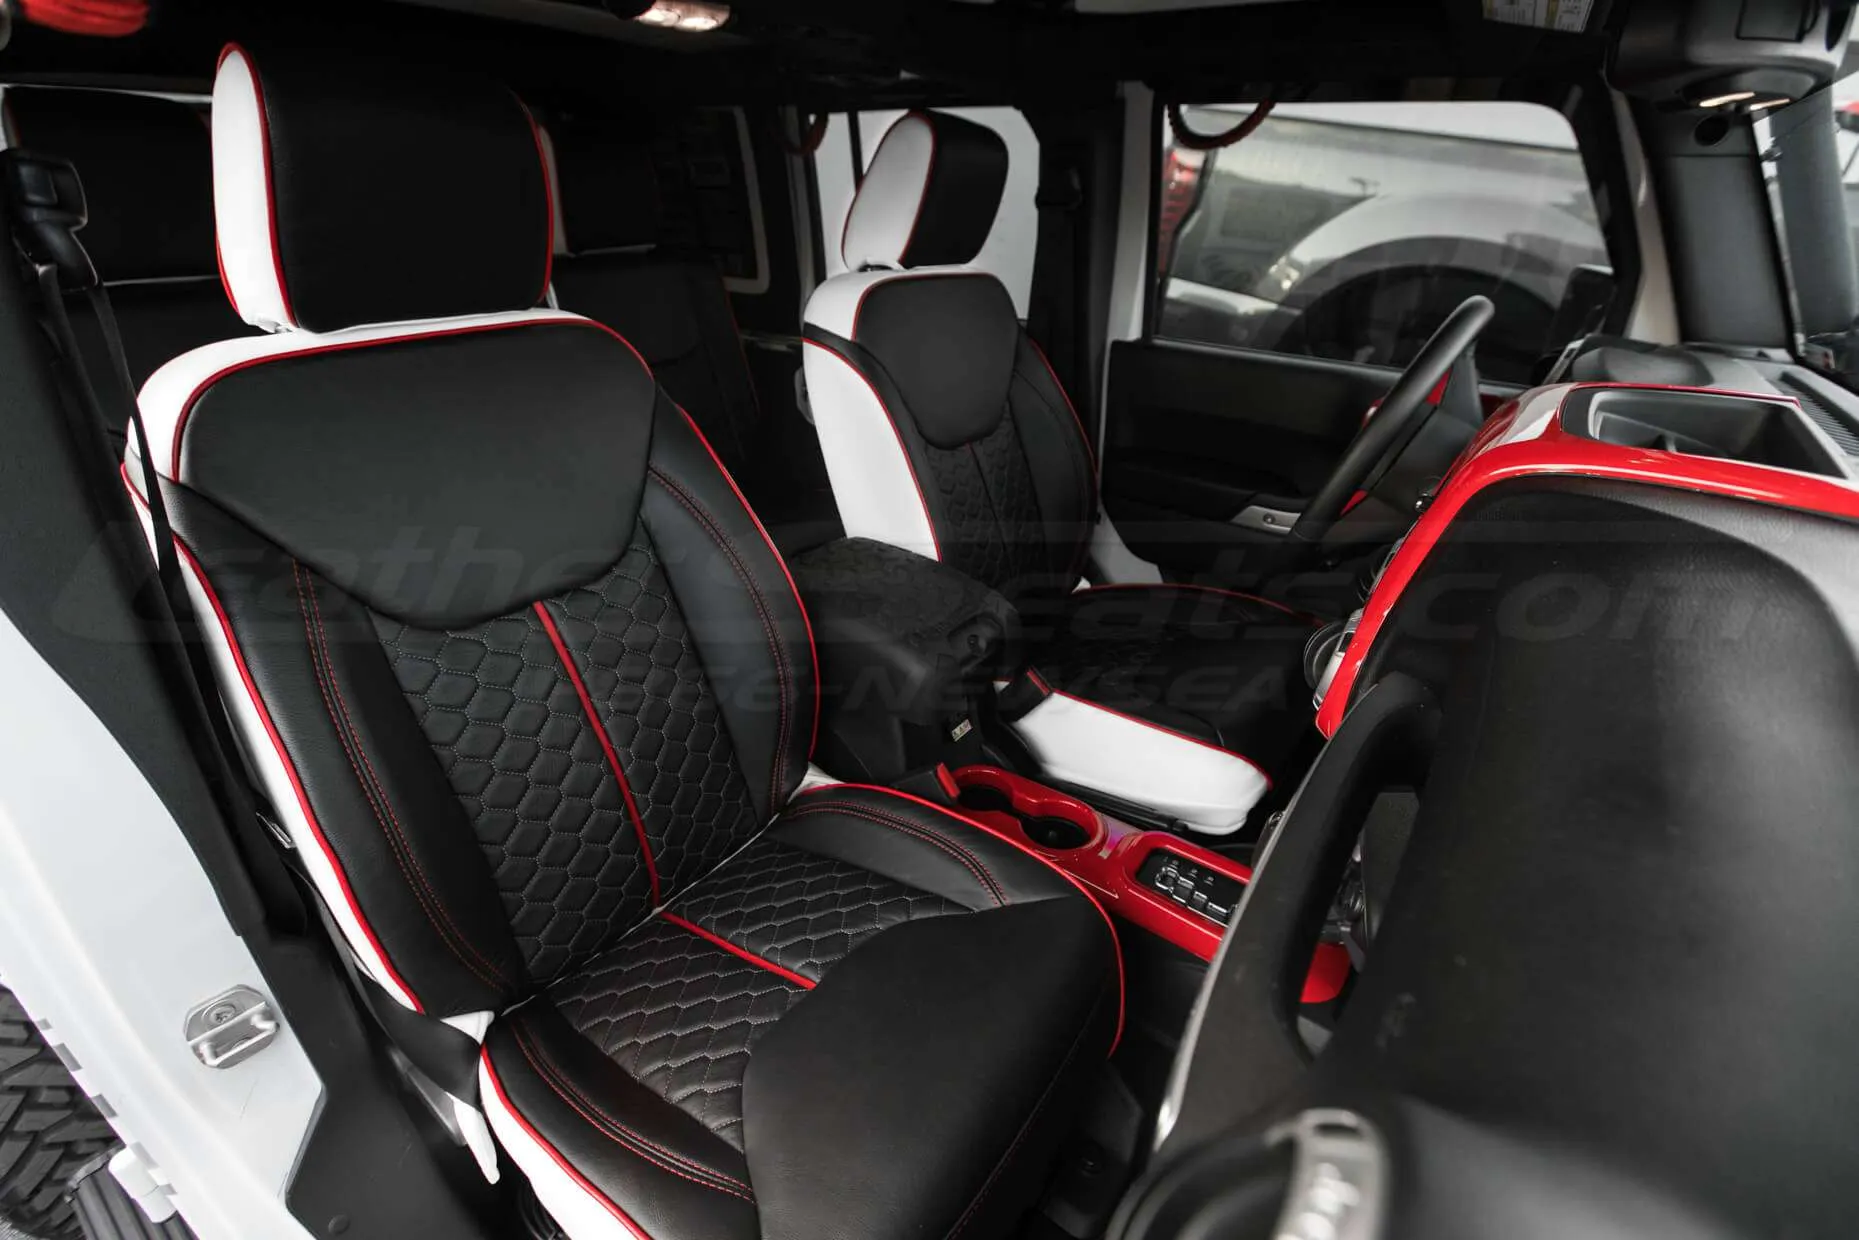 2013-2018 Jeep Wrangler Reticulated Hex installed Upholstery Kit - White/Black/Bright Red - Front interior passenger side view